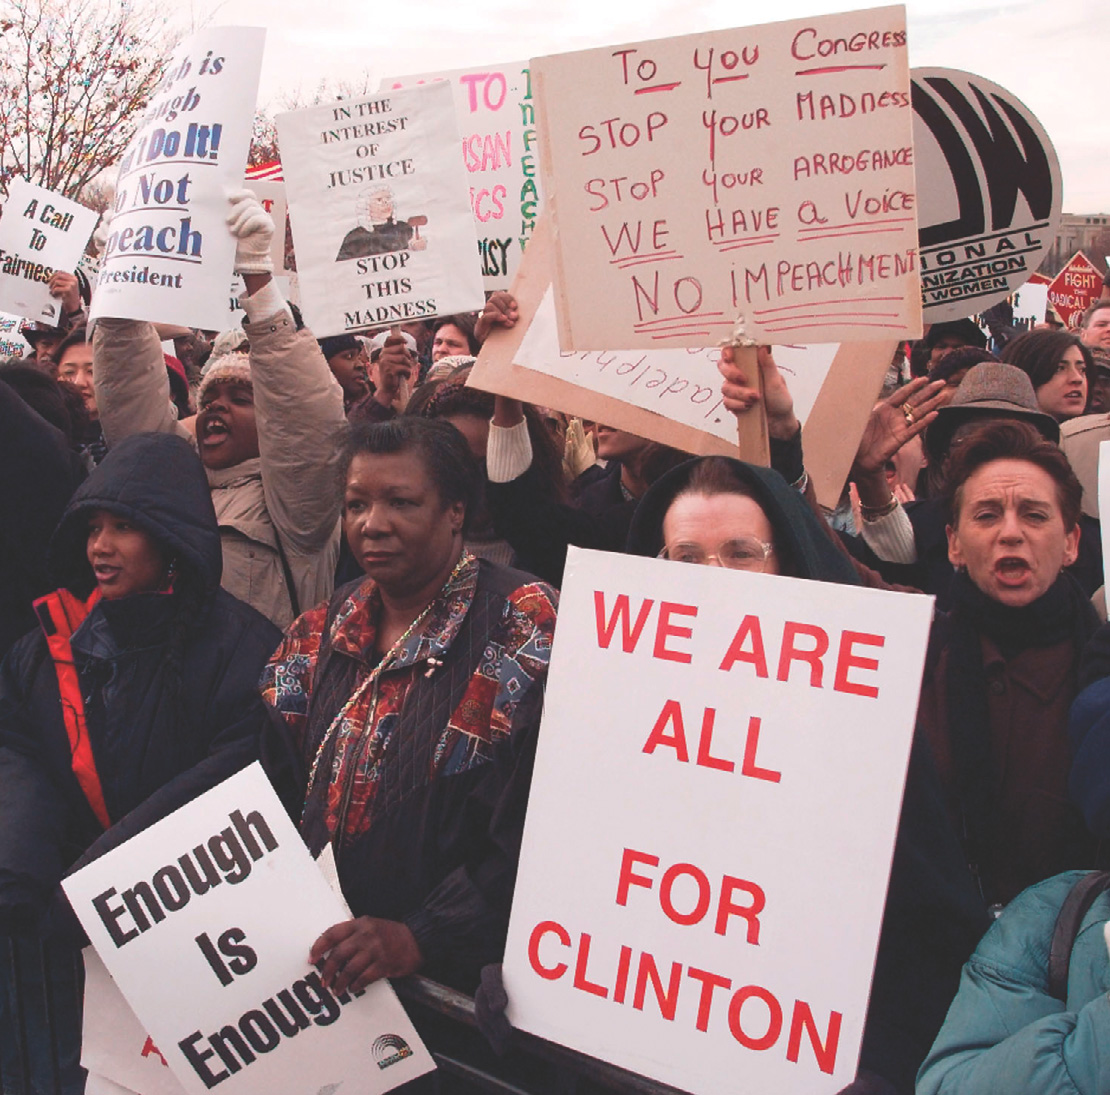 photo: protesters hold signs that read 'Enough is Enough' 'No Impeachment' and 'We are all for Clinton.'